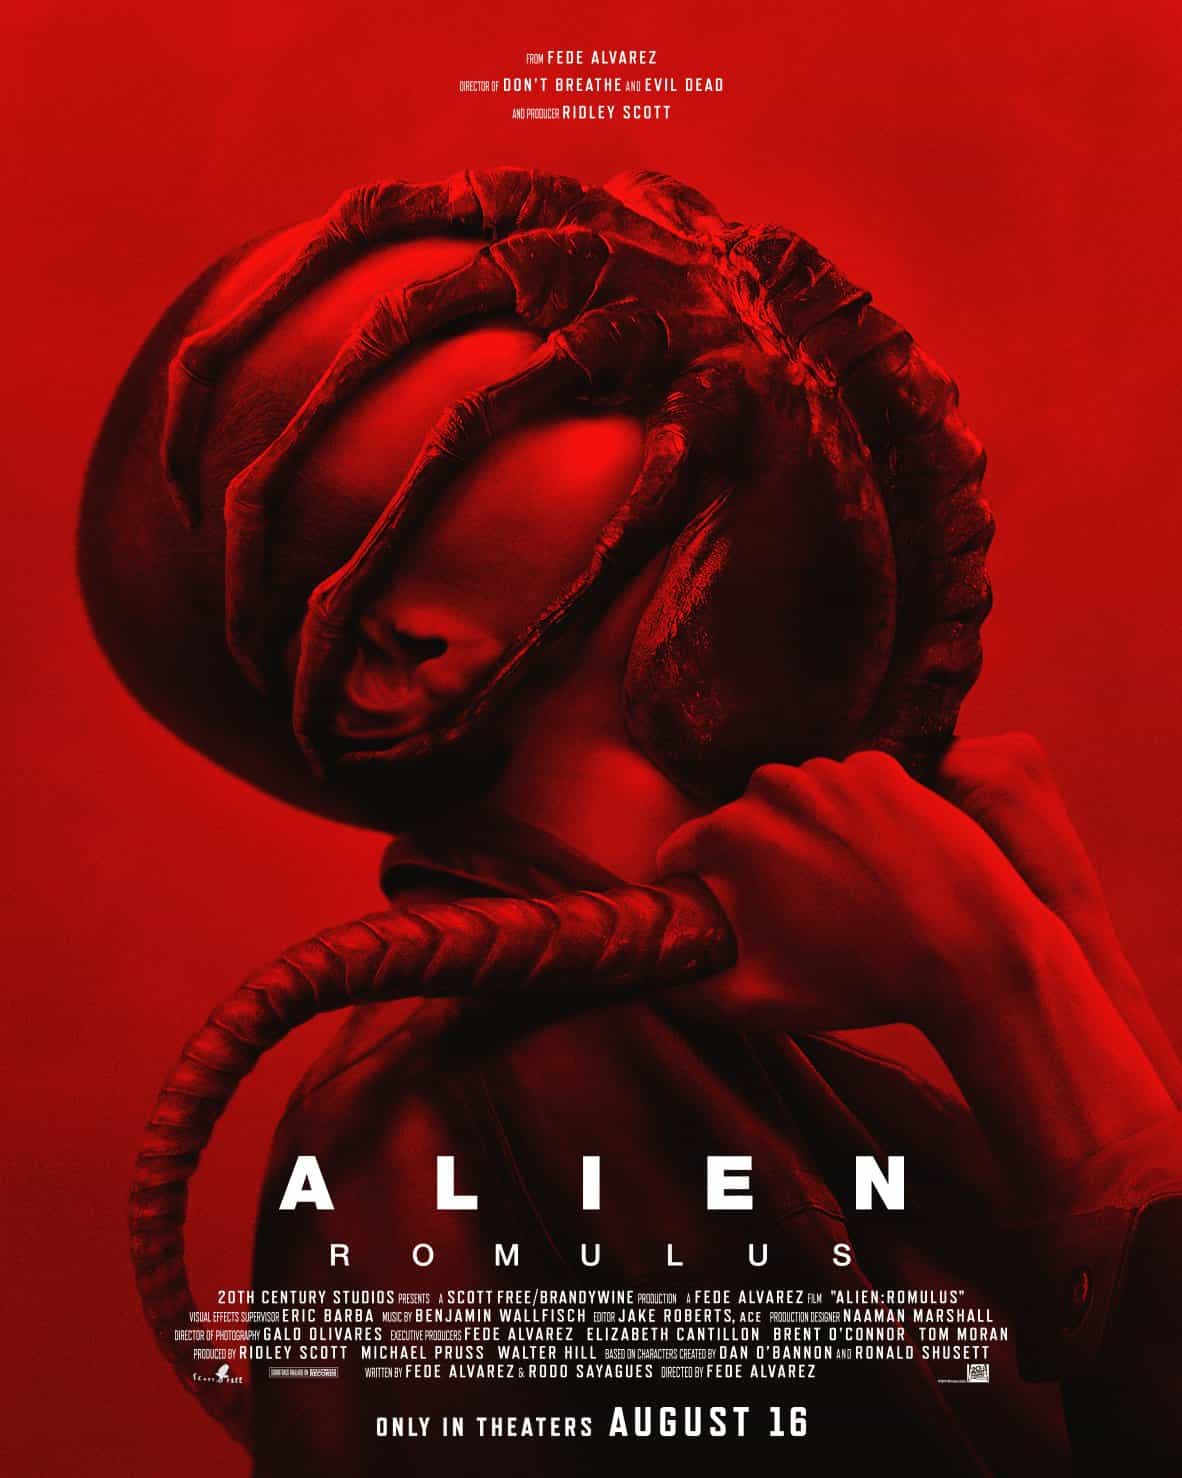 Check out the new trailer and poster for upcoming movie Alien: Romulus which stars Cailee Spaeny and Isabela Merced - movie UK release date 16th August 2024 #alienromulus